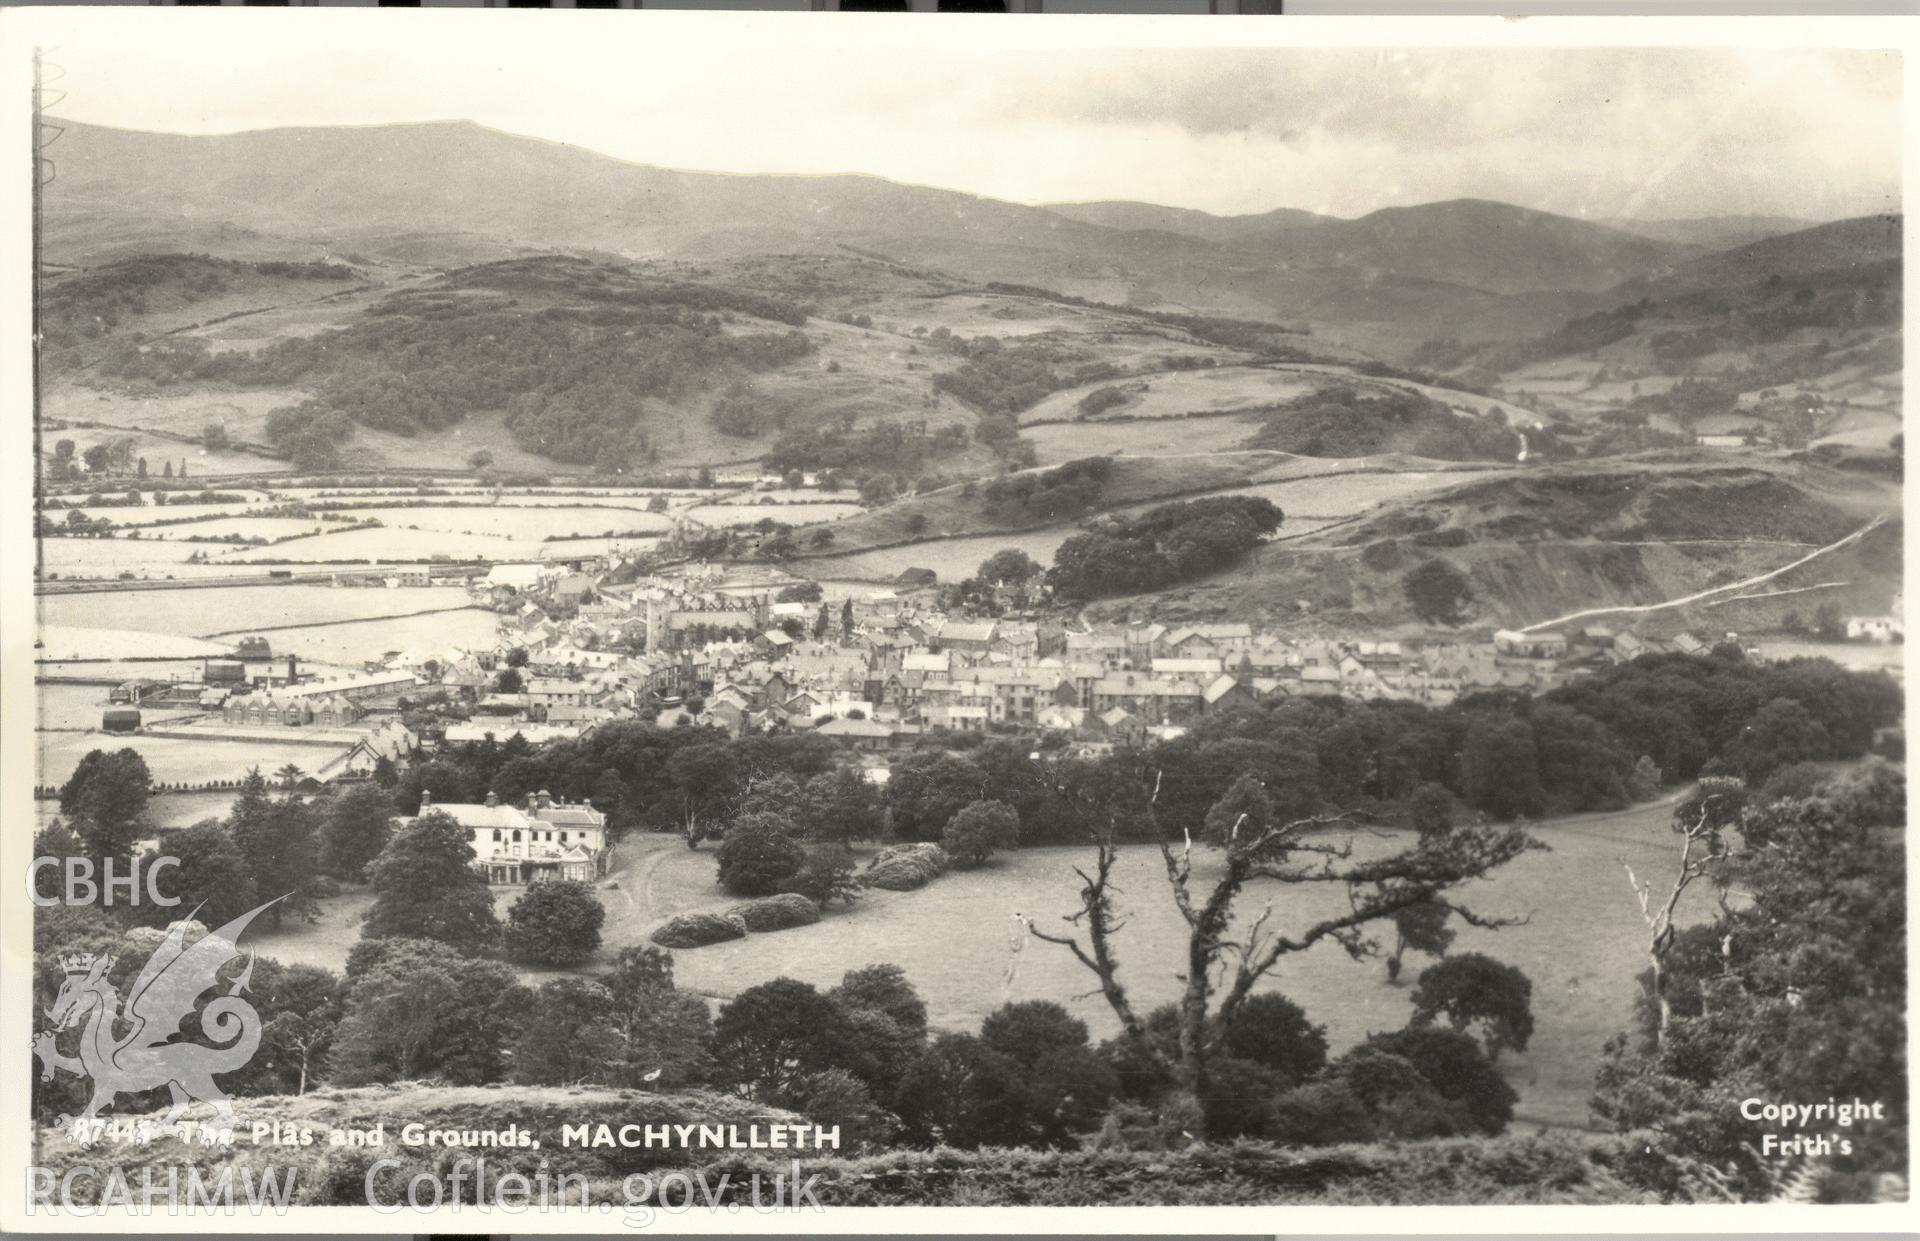 Digitised postcard image of Machynlleth town from high viewpoint above the Plas, Frith's Series. Produced by Parks and Gardens Data Services, from an original item in the Peter Davis Collection at Parks and Gardens UK. We hold only web-resolution images of this collection, suitable for viewing on screen and for research purposes only. We do not hold the original images, or publication quality scans.